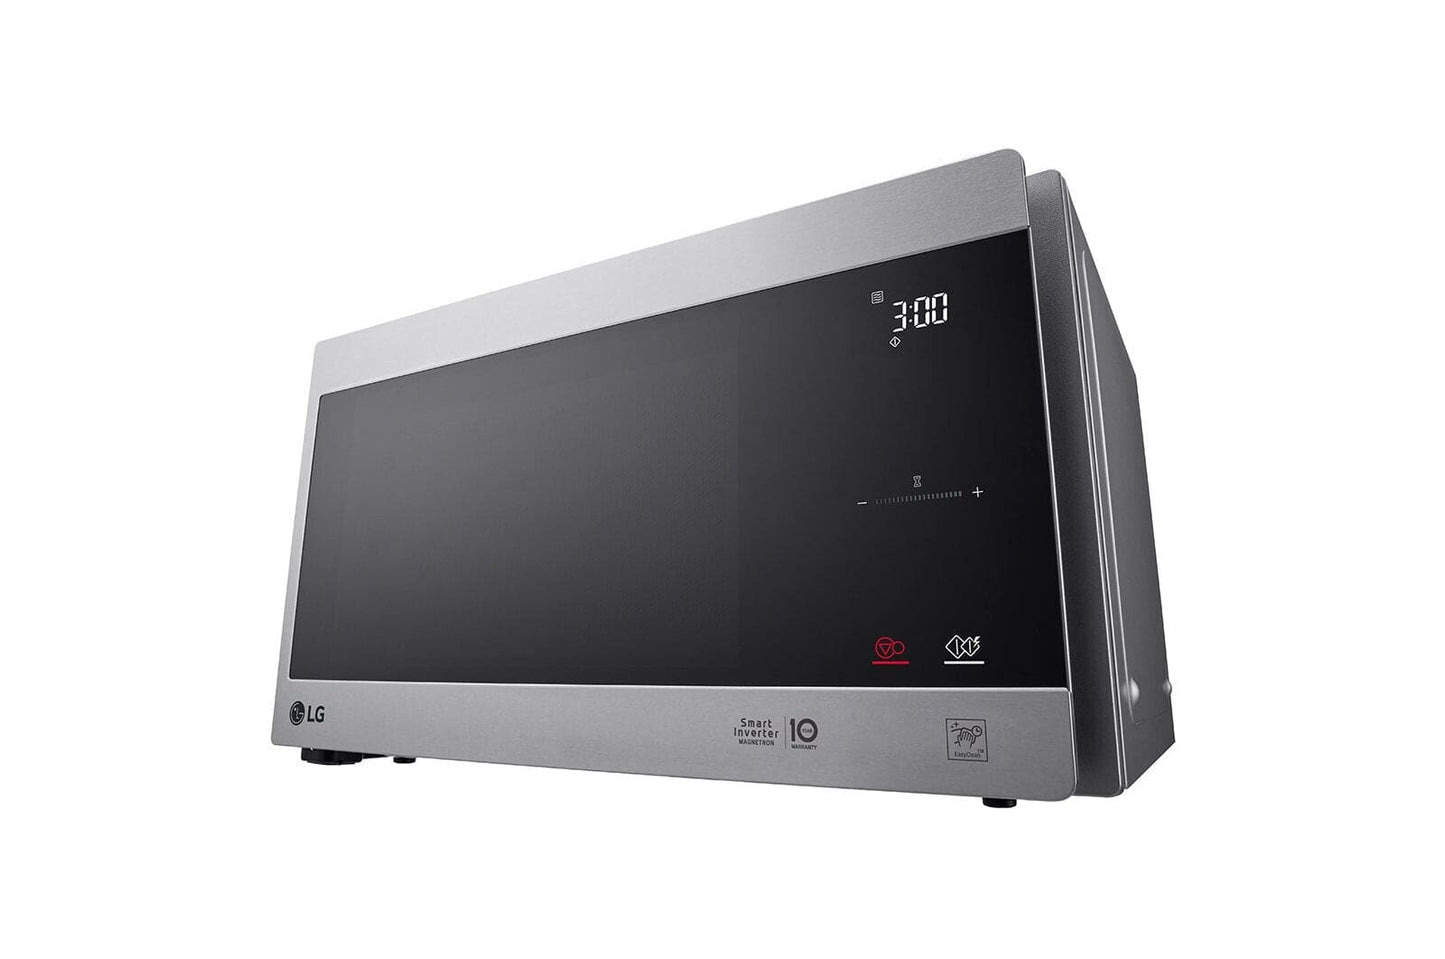 LG MS4295CIS 1200W 42L Microwave Oven - MWO 4295 CIS